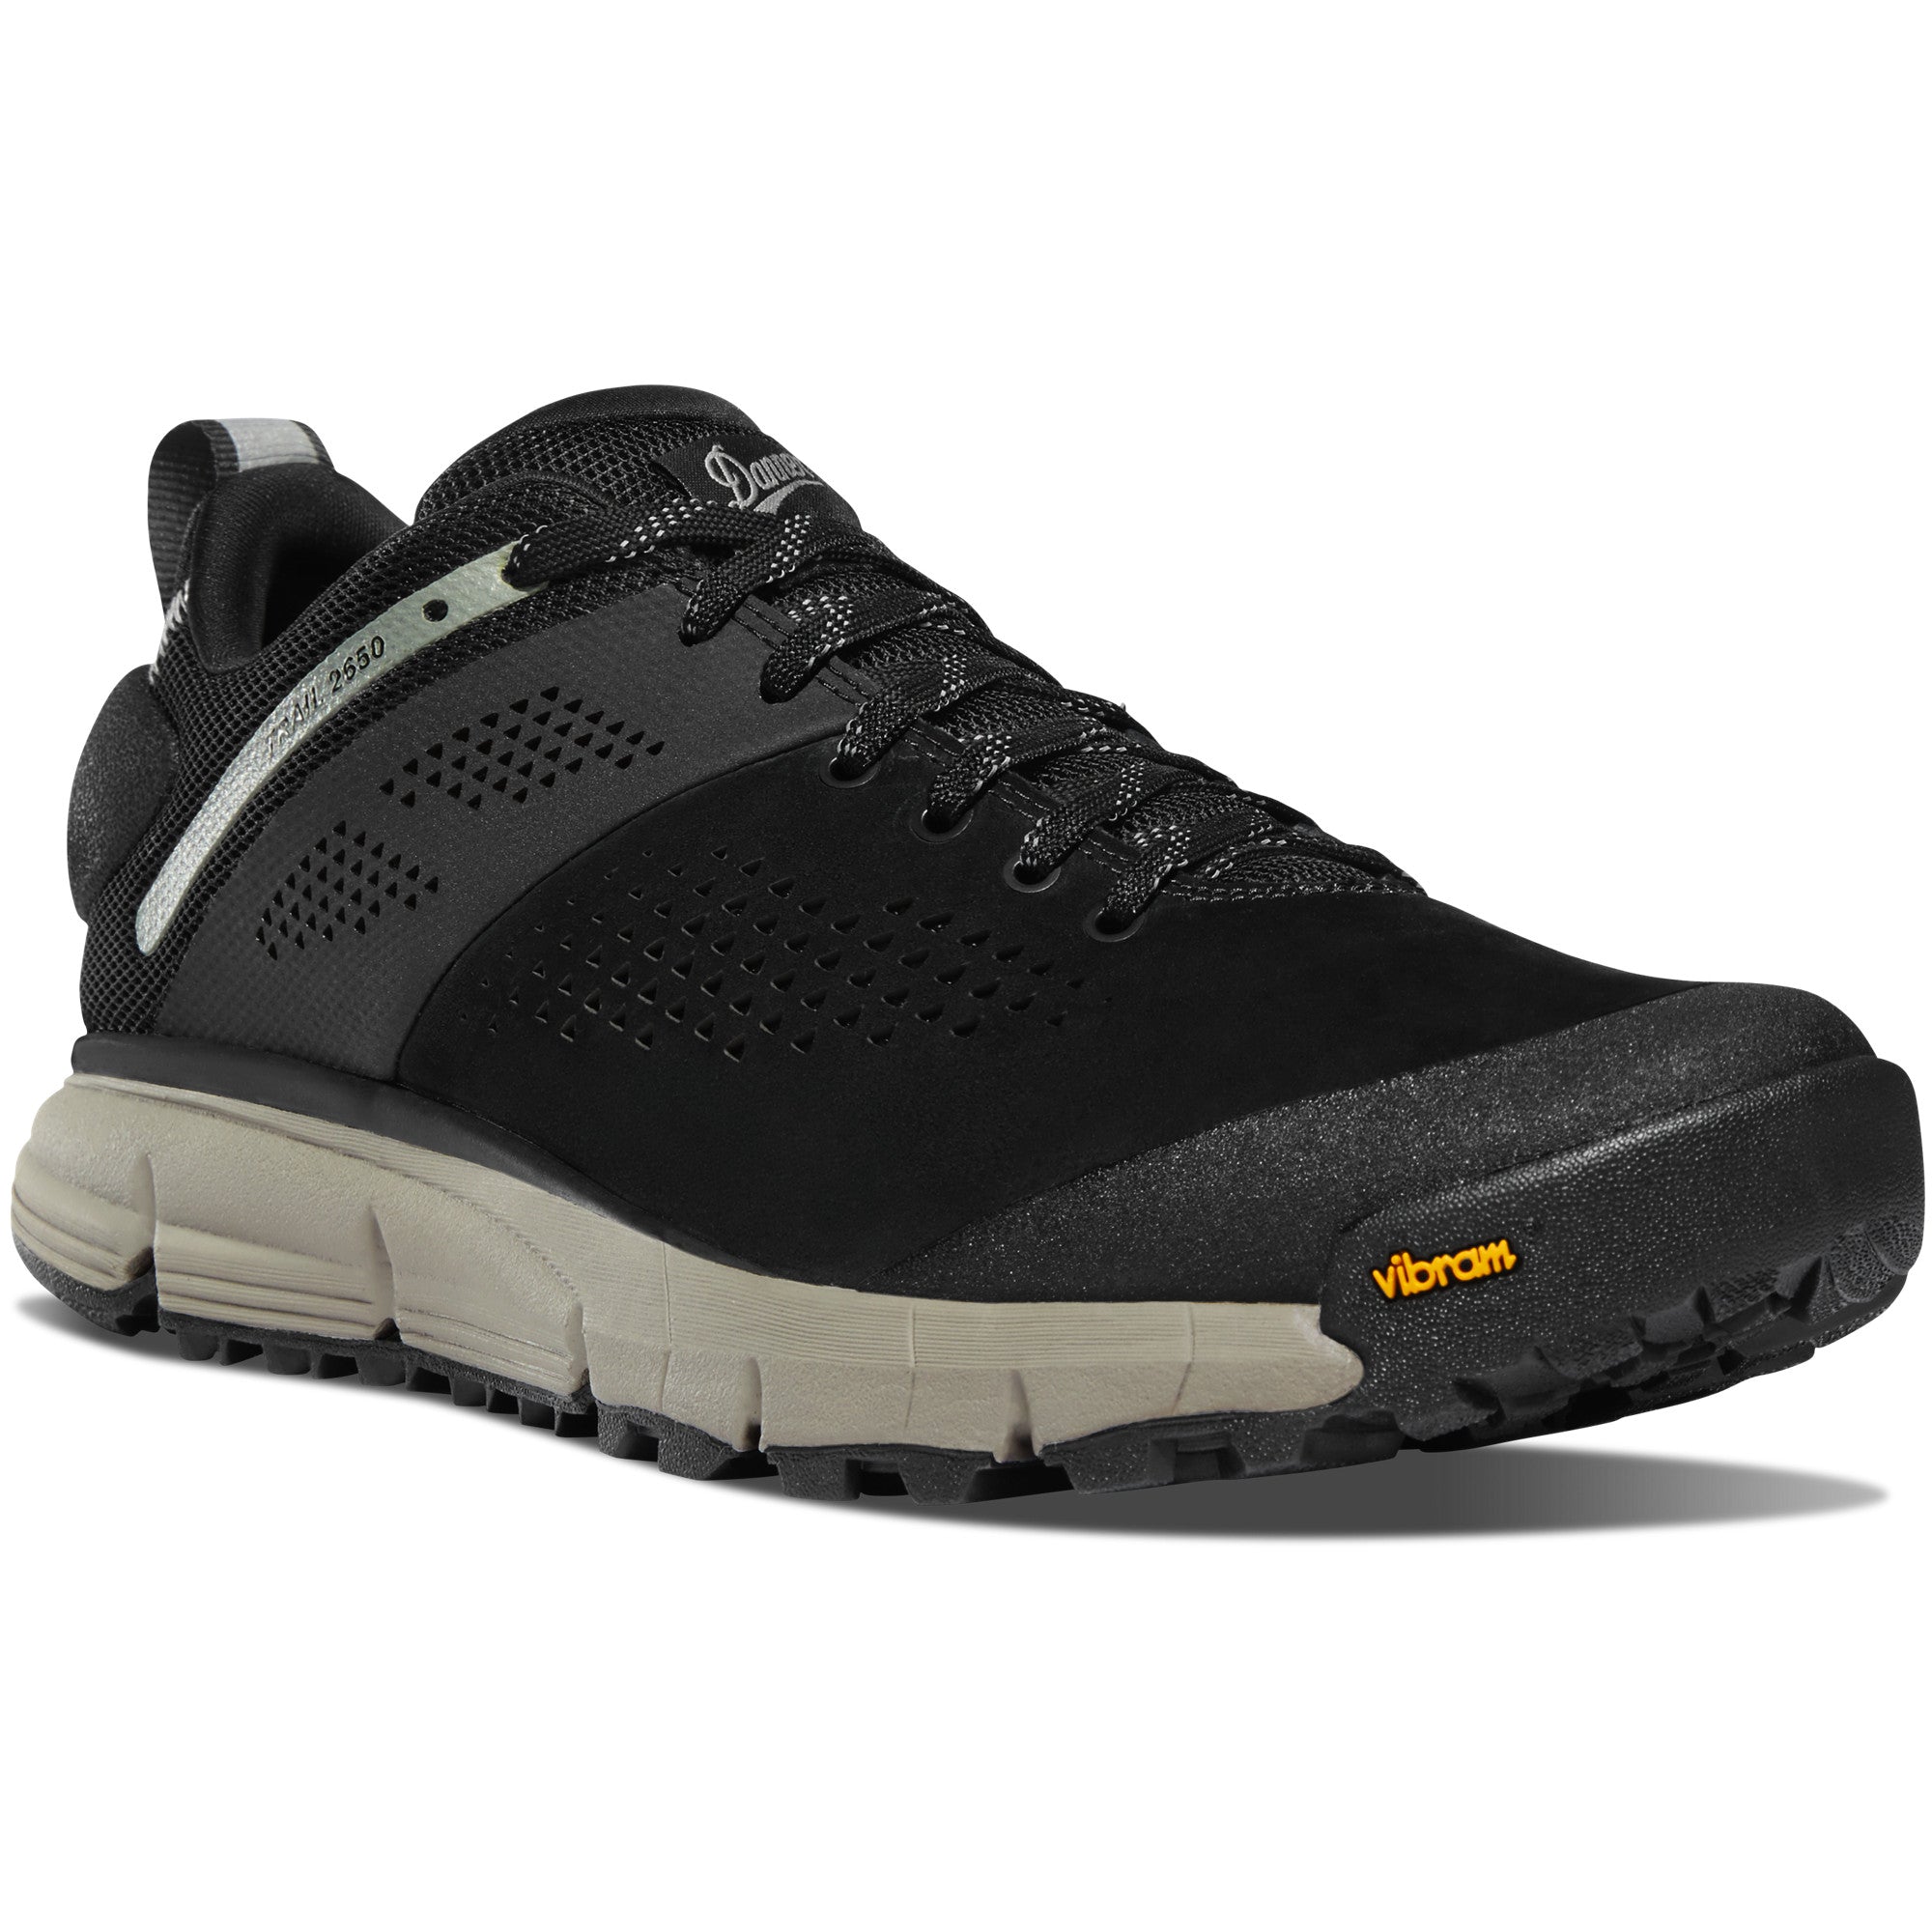 Danner Men's Trail 2650 3" Hiking Shoe in Black/Gray from the side